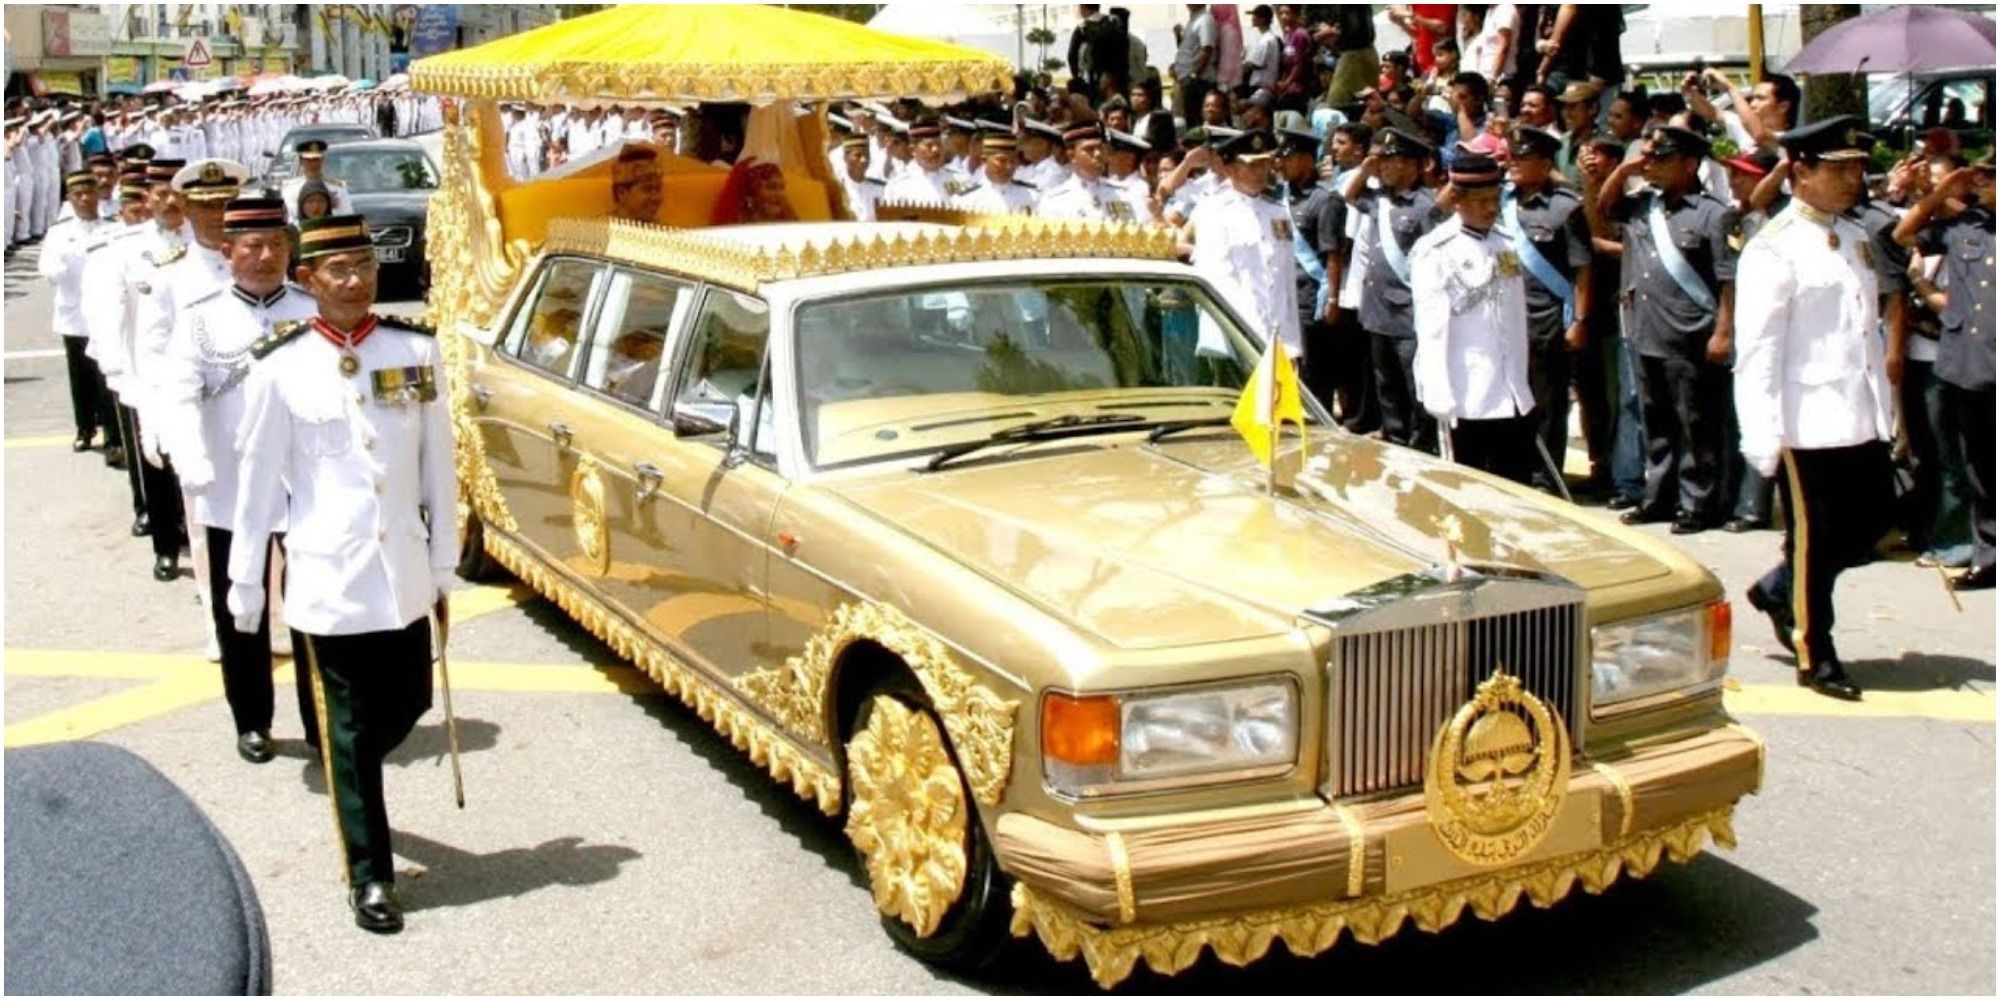 royal escort of Sultan of Brunei in his Rolls Royce Silver Spur Limo